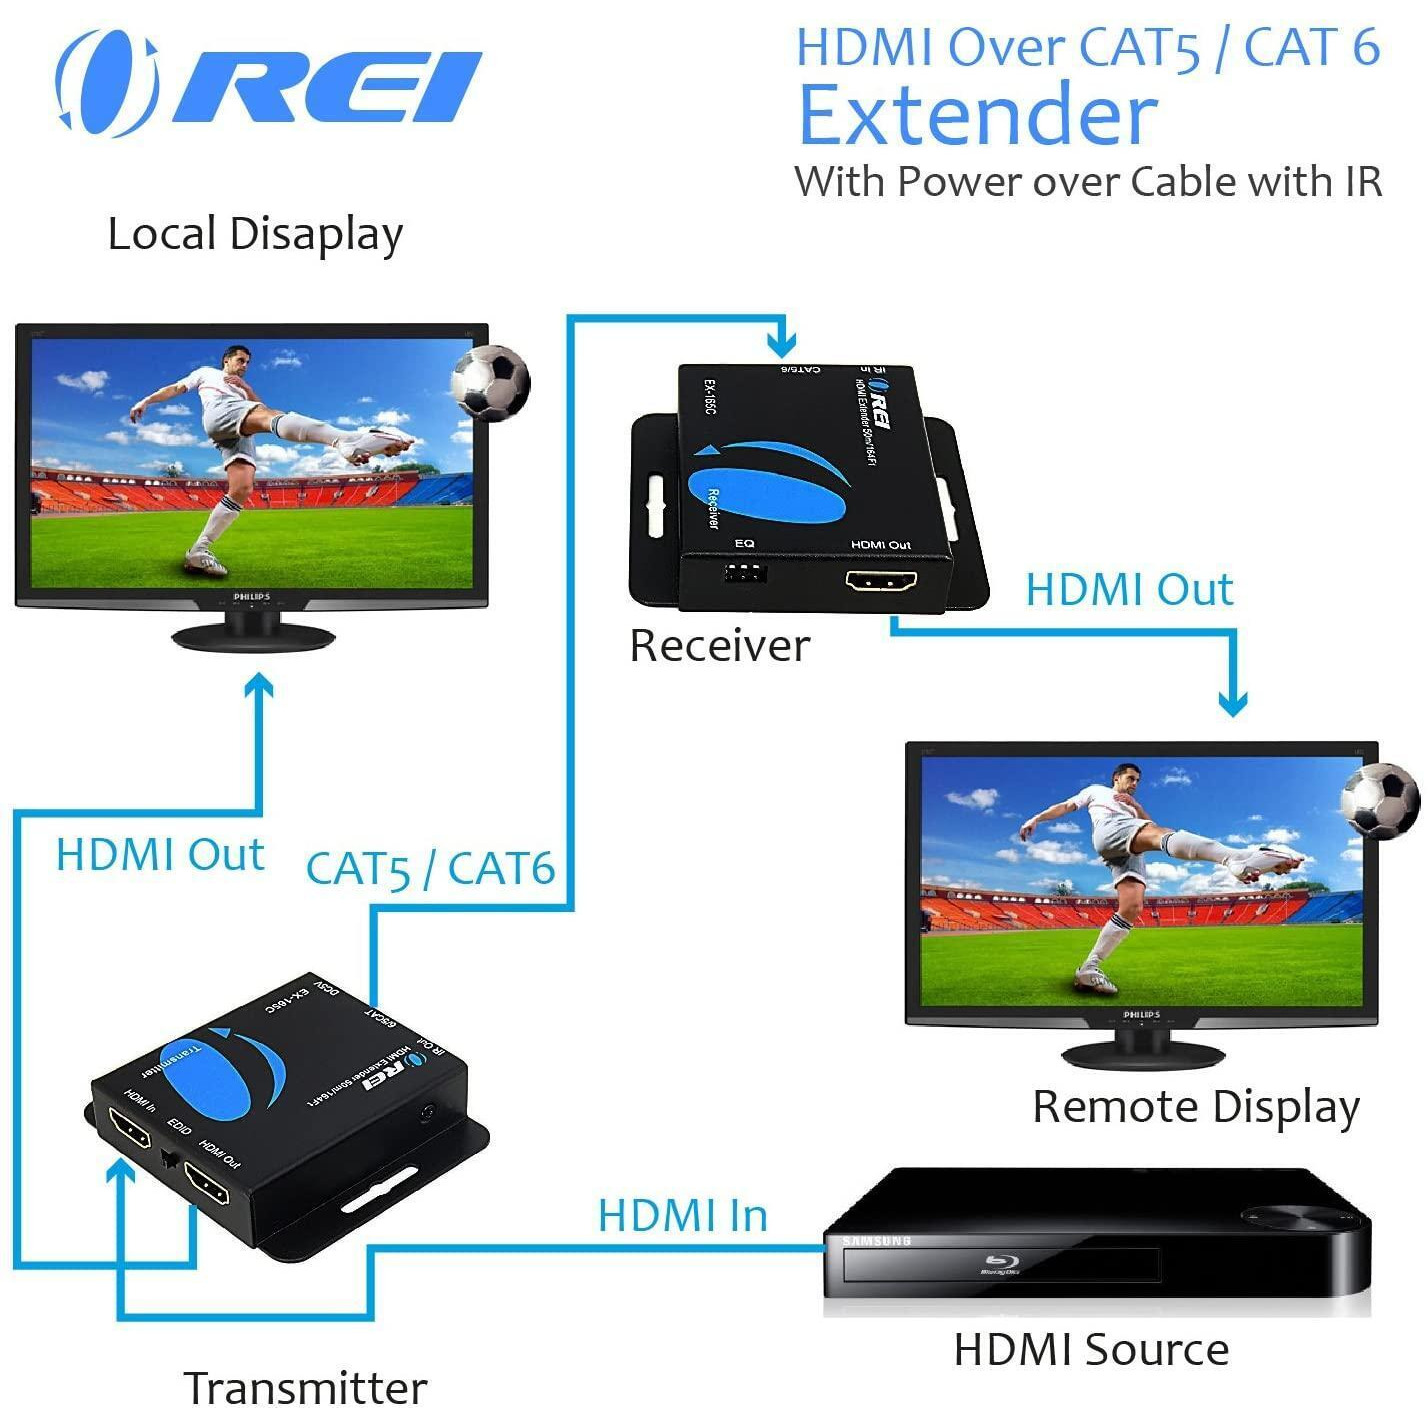 HDMI Extender Over LAN by Orei Single CAT6A/Cat7 Cable Uncompressed 1080P @ 60Hz with IR - Up to 196 ft - Loop Out Function - Digital Full HD, EX-196PRO-K alternate image